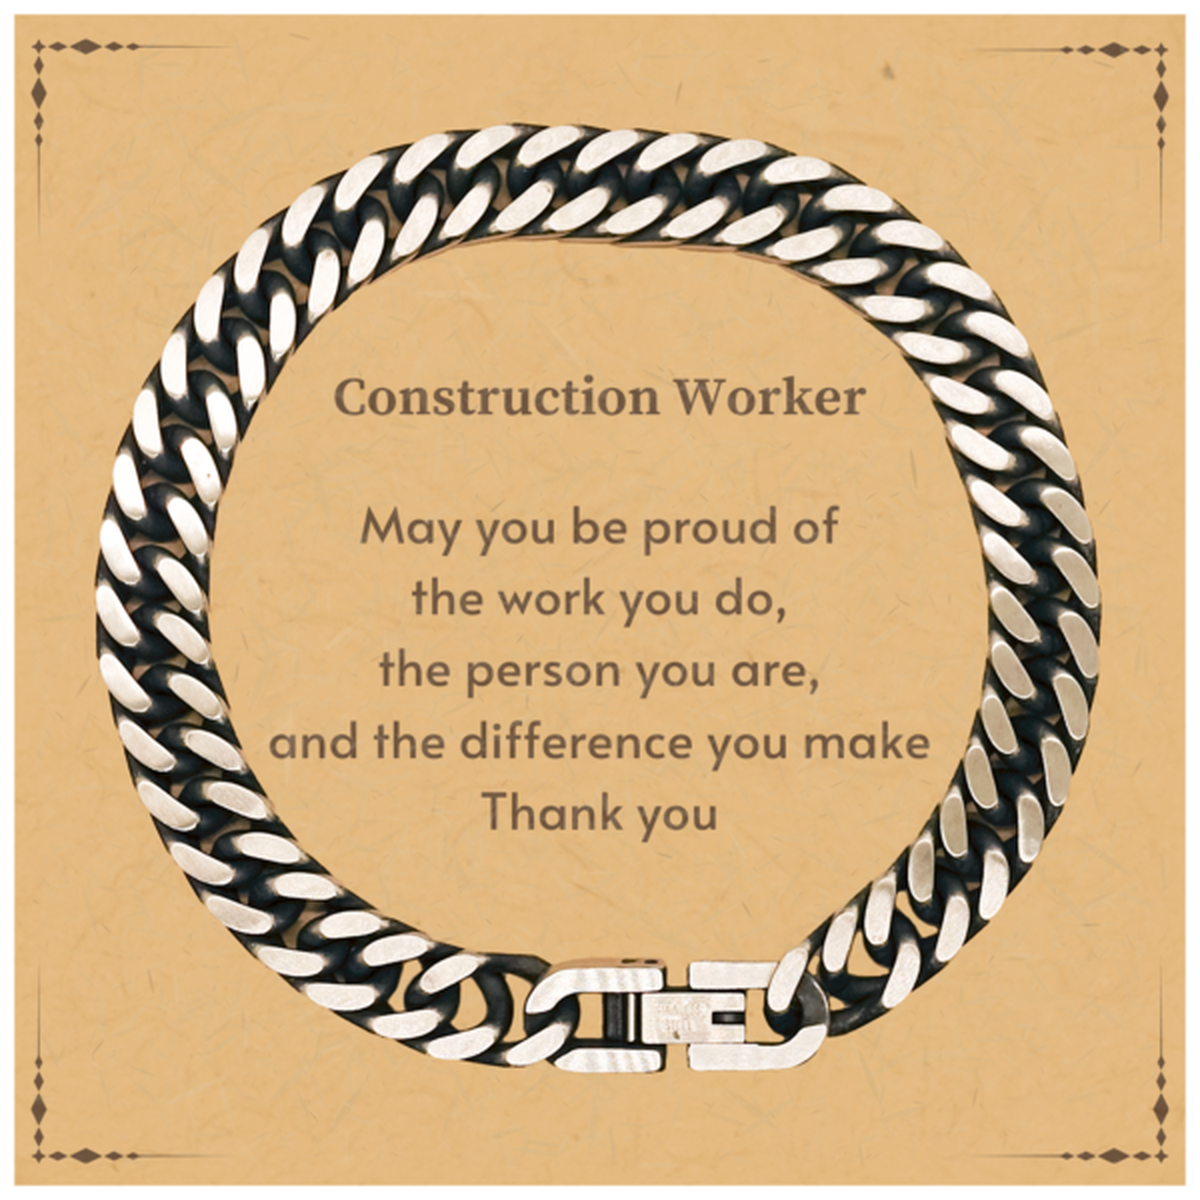 Heartwarming Cuban Link Chain Bracelet Retirement Coworkers Gifts for Construction Worker, Construction Worker May You be proud of the work you do, the person you are Gifts for Boss Men Women Friends